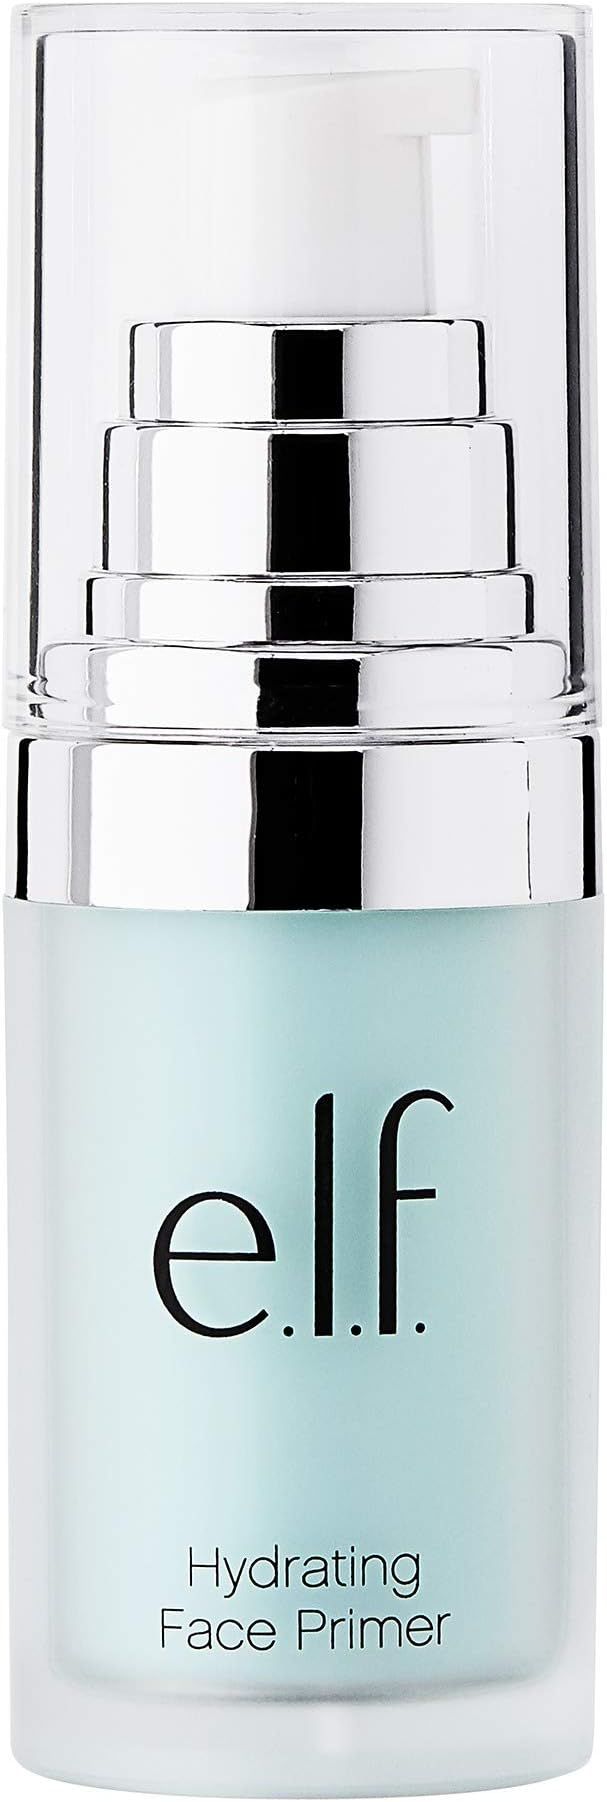 e.l.f., Hydrating Face Primer, Lightweight, Long Lasting, Creamy, Hydrates, Smooths, Fills in Por... | Amazon (US)